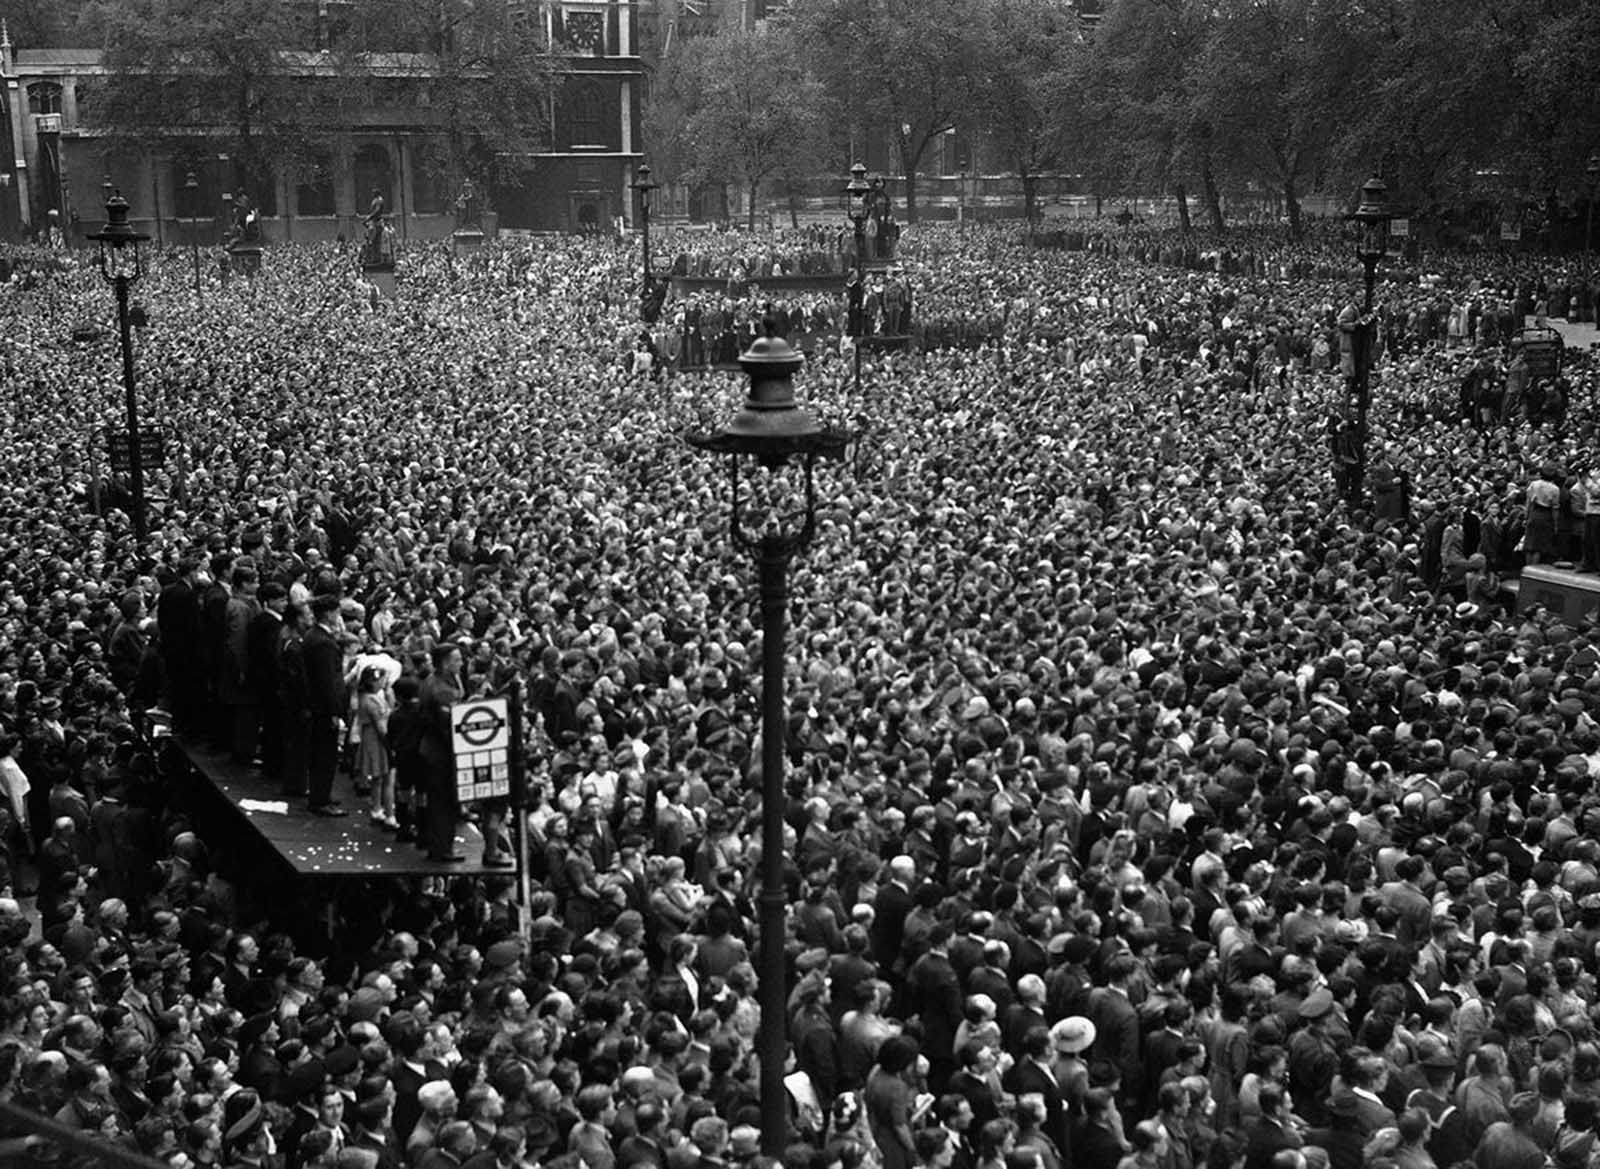 A seething mass of humanity jammed itself into Whitehall in central London on VE-Day (Victory in Europe Day), May 8, 1945, to hear the premier officially announce Germany's unconditional surrender. More than one million people celebrated in the streets of London.